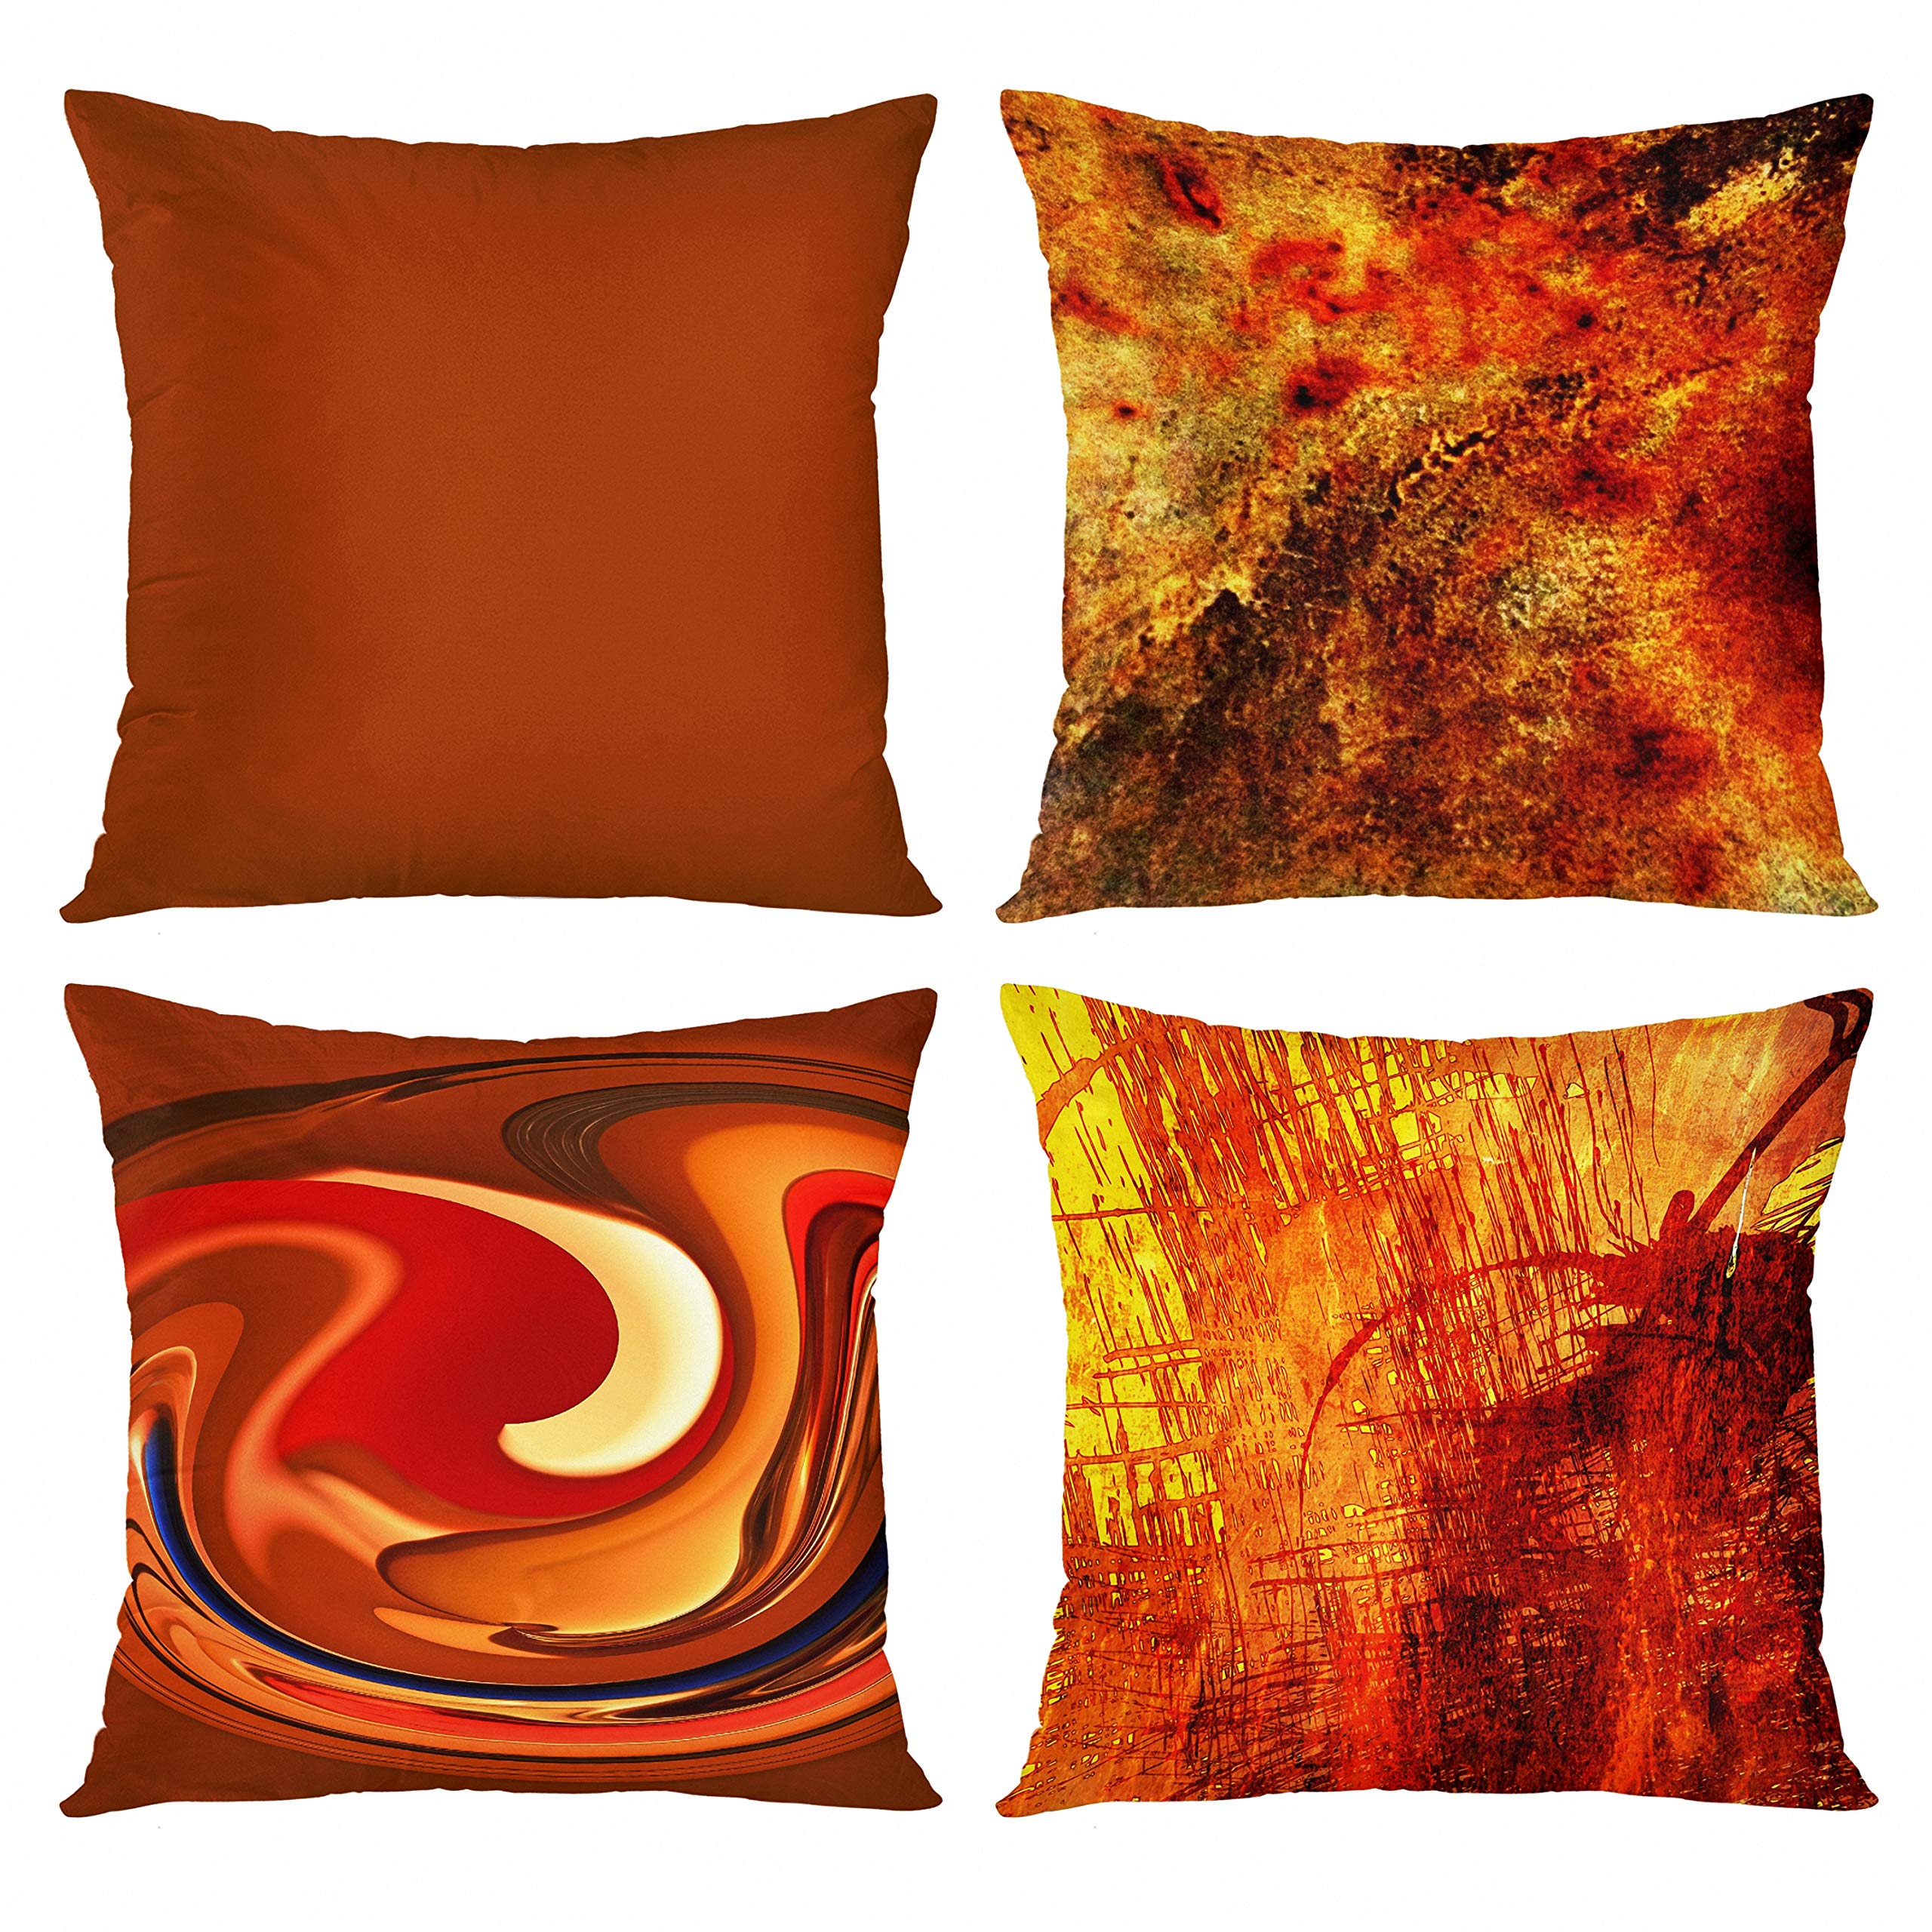 Book Cover Emvency Set of 4 Throw Pillow Covers Burnt Orange Abstract Red 20 Tan Funky Watercolor Grunge Monochrome Decorative Pillow Cases Accent Couch Home Decor Square 20x20 Inches Pillowcases 20 x 20 inches